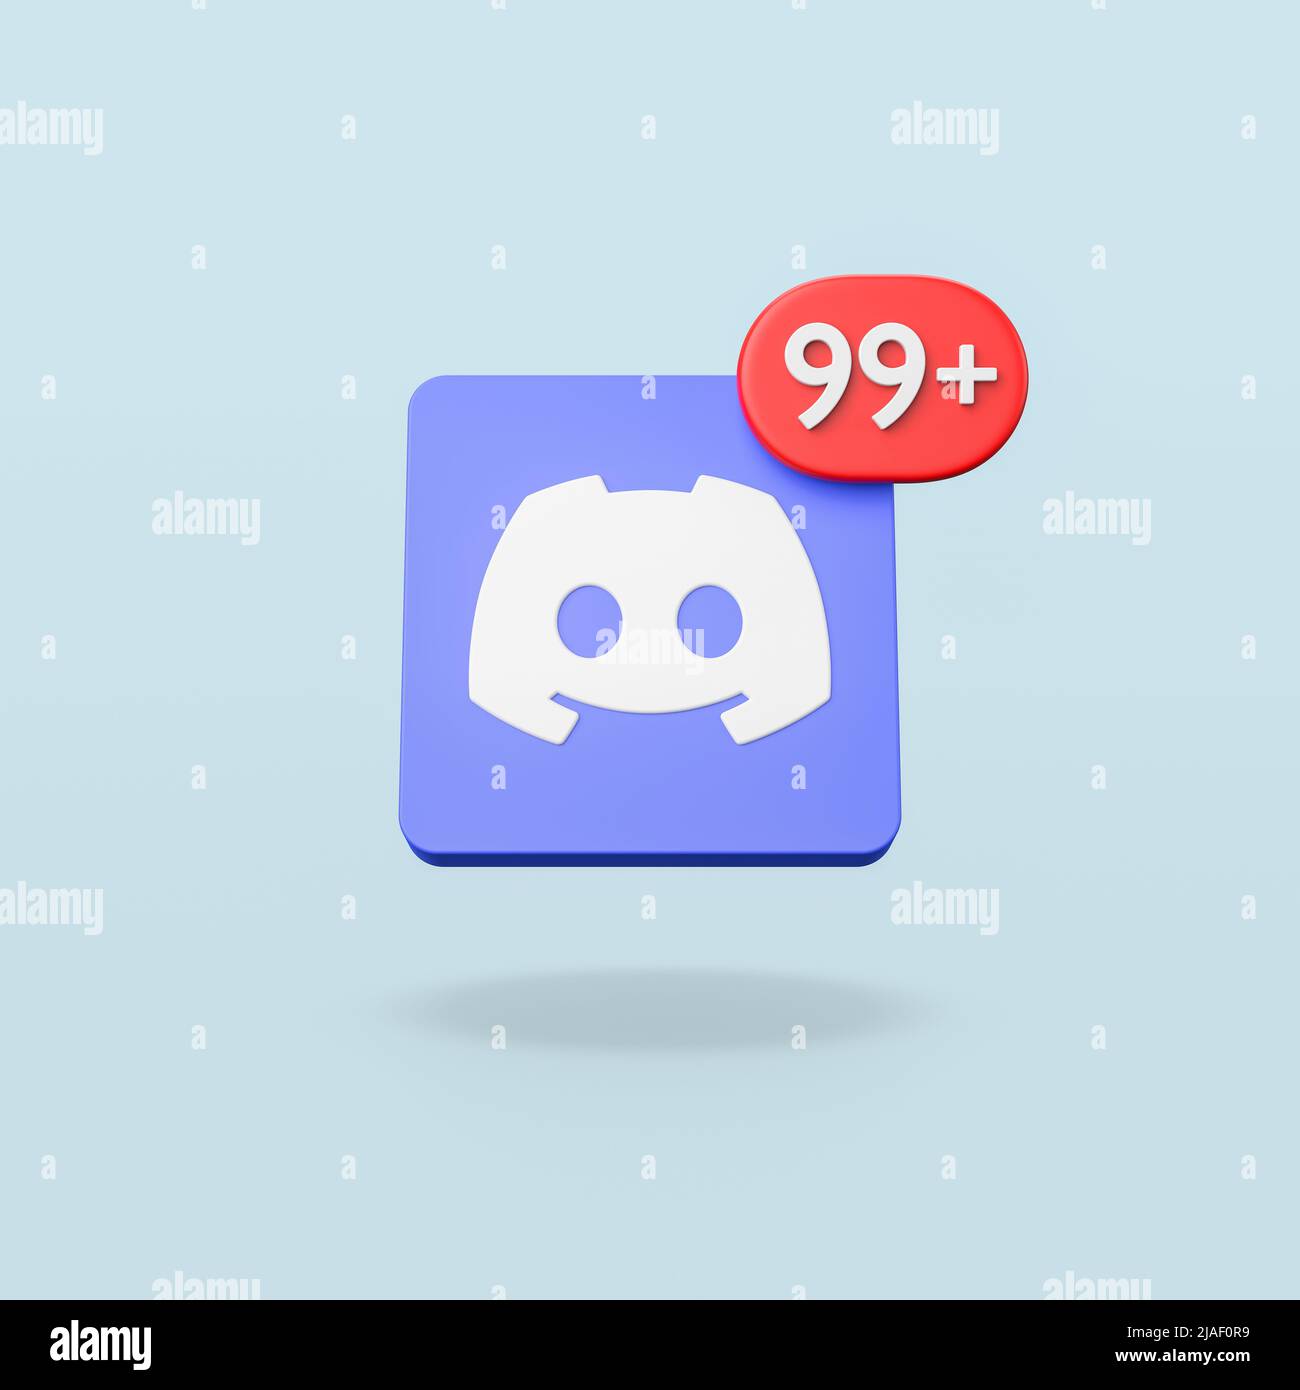 Discord Logo with Notification on Blue Background Stock Photo